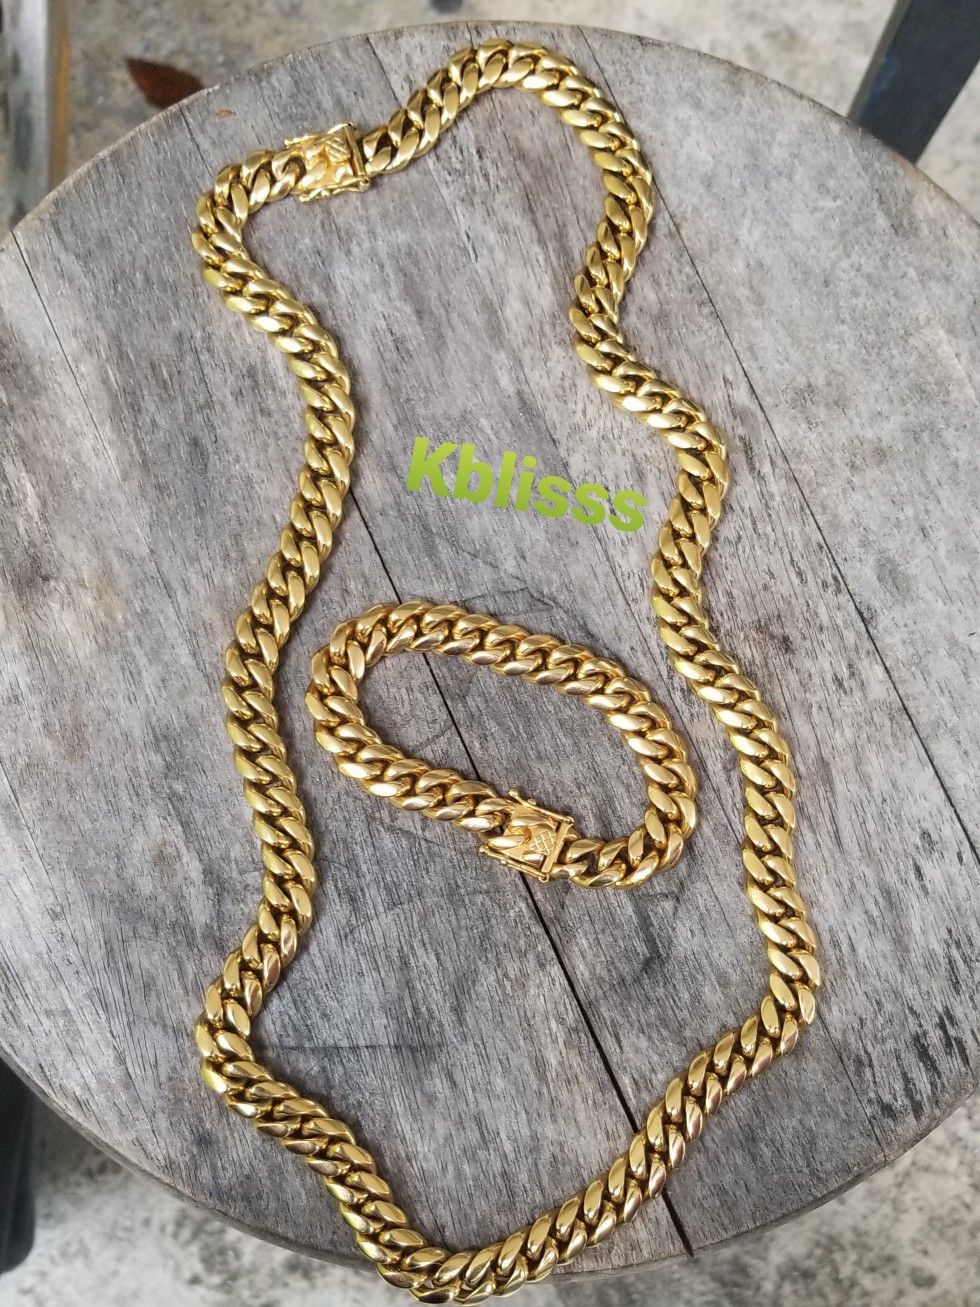 Black Friday Sale 🔥🔥🔥14k Gold Plated Miami Cuban Link Chain and Bracelet Set....Available for Pick up or Delivery 🚚🚗